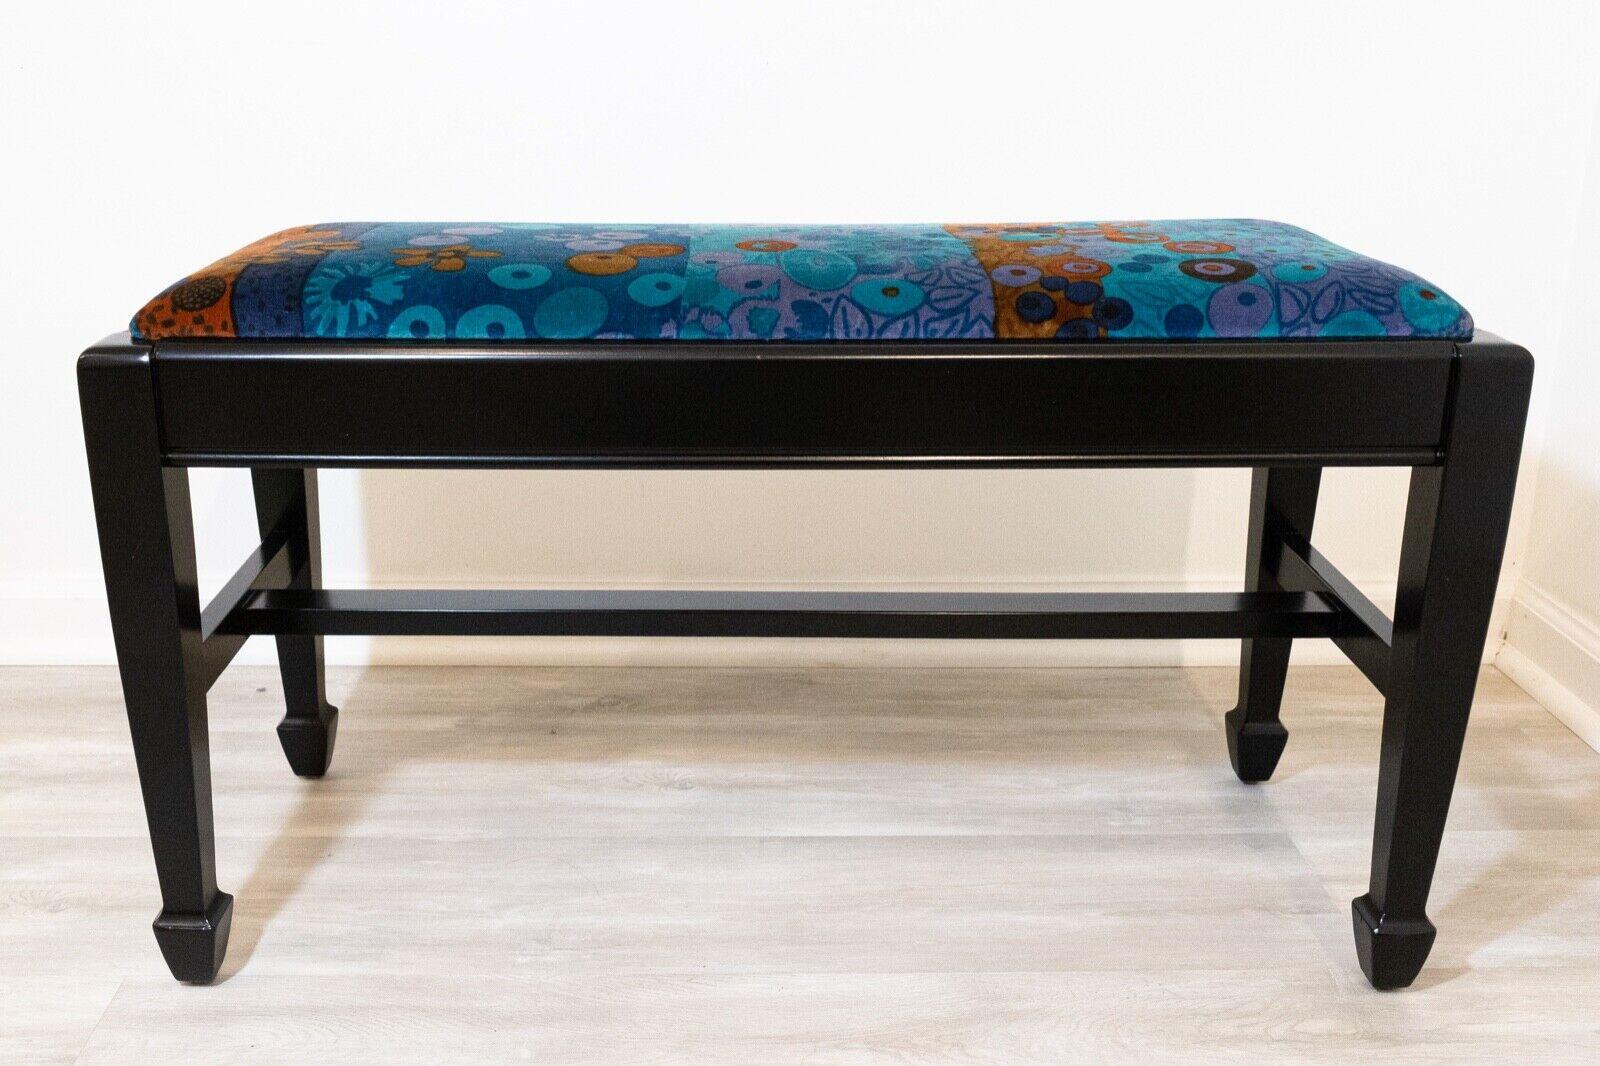 We presents this newly professionally black ebonized bench with Jack Lenor Larsen upholstery. In great condition. Dimensions: 33.5